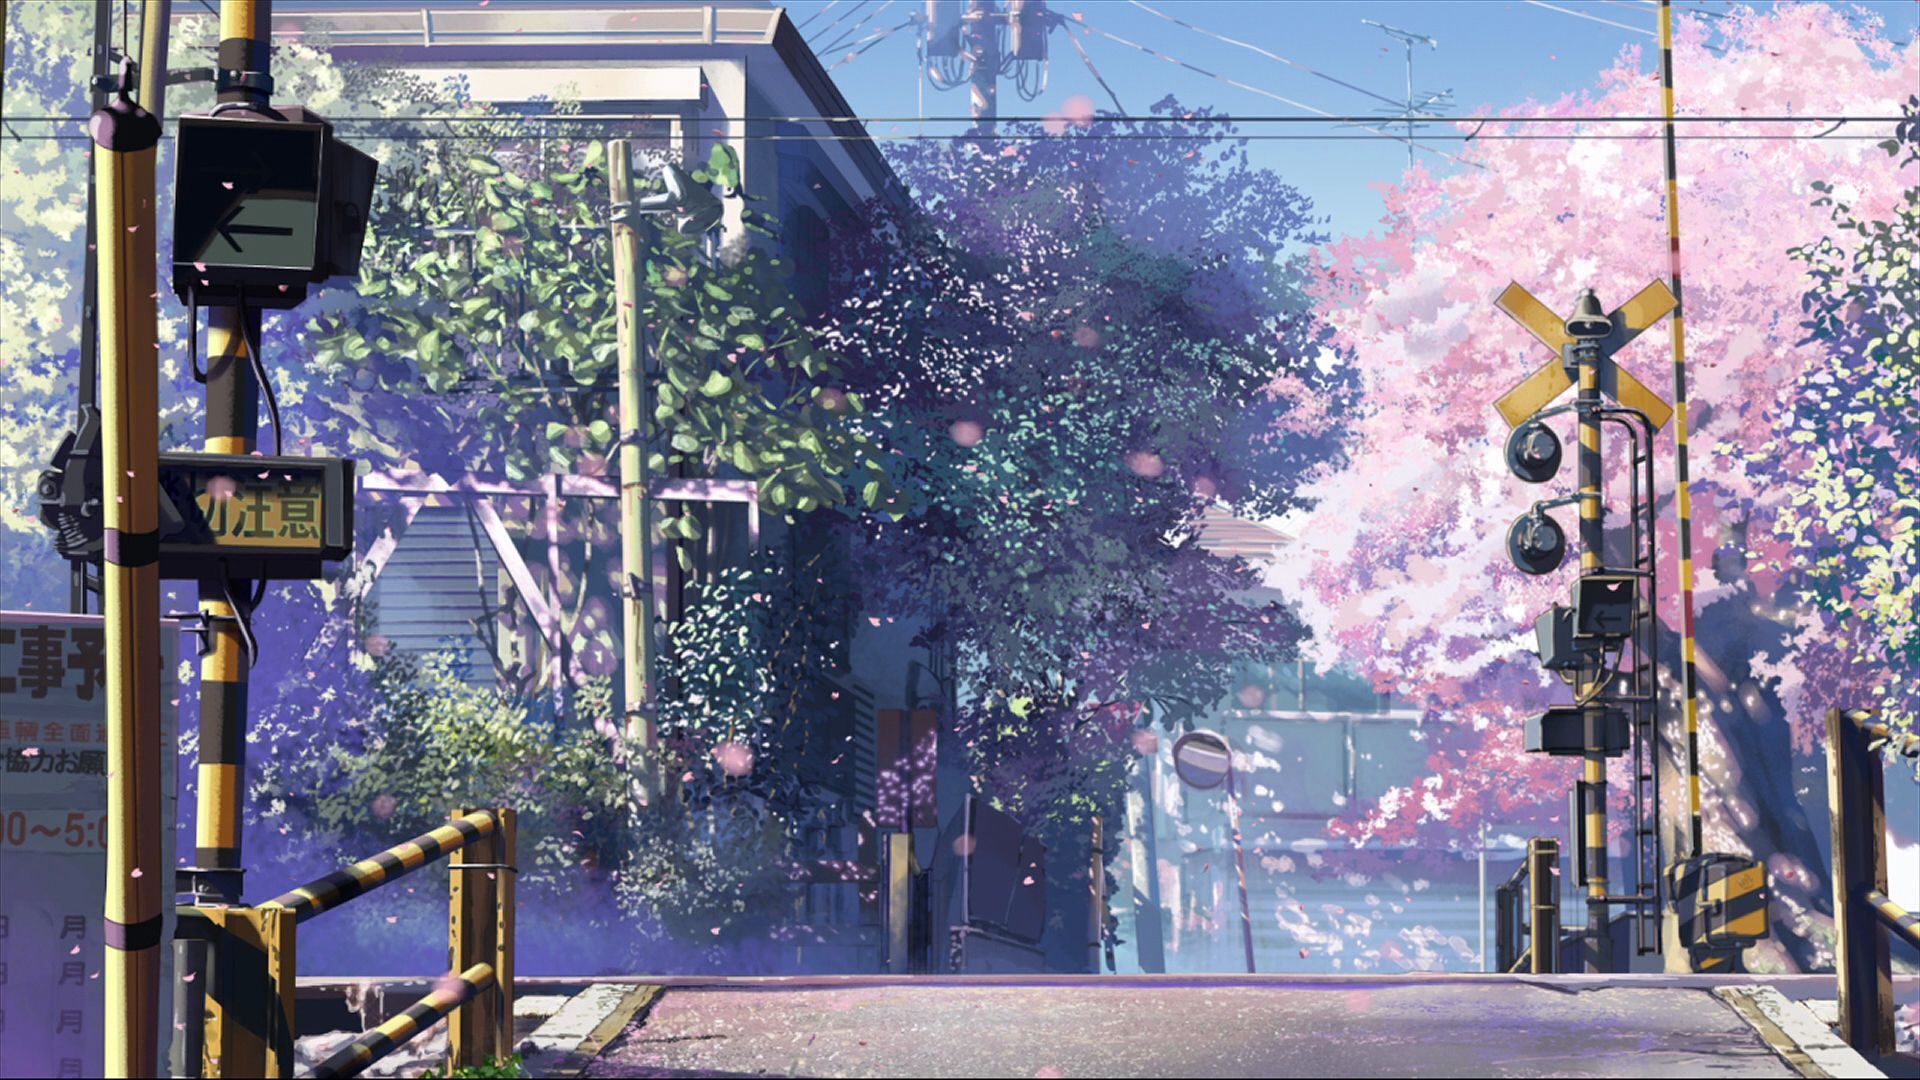 Check Out This Amazing Anime Art Blog. Anime scenery wallpaper, Anime background, Anime scenery